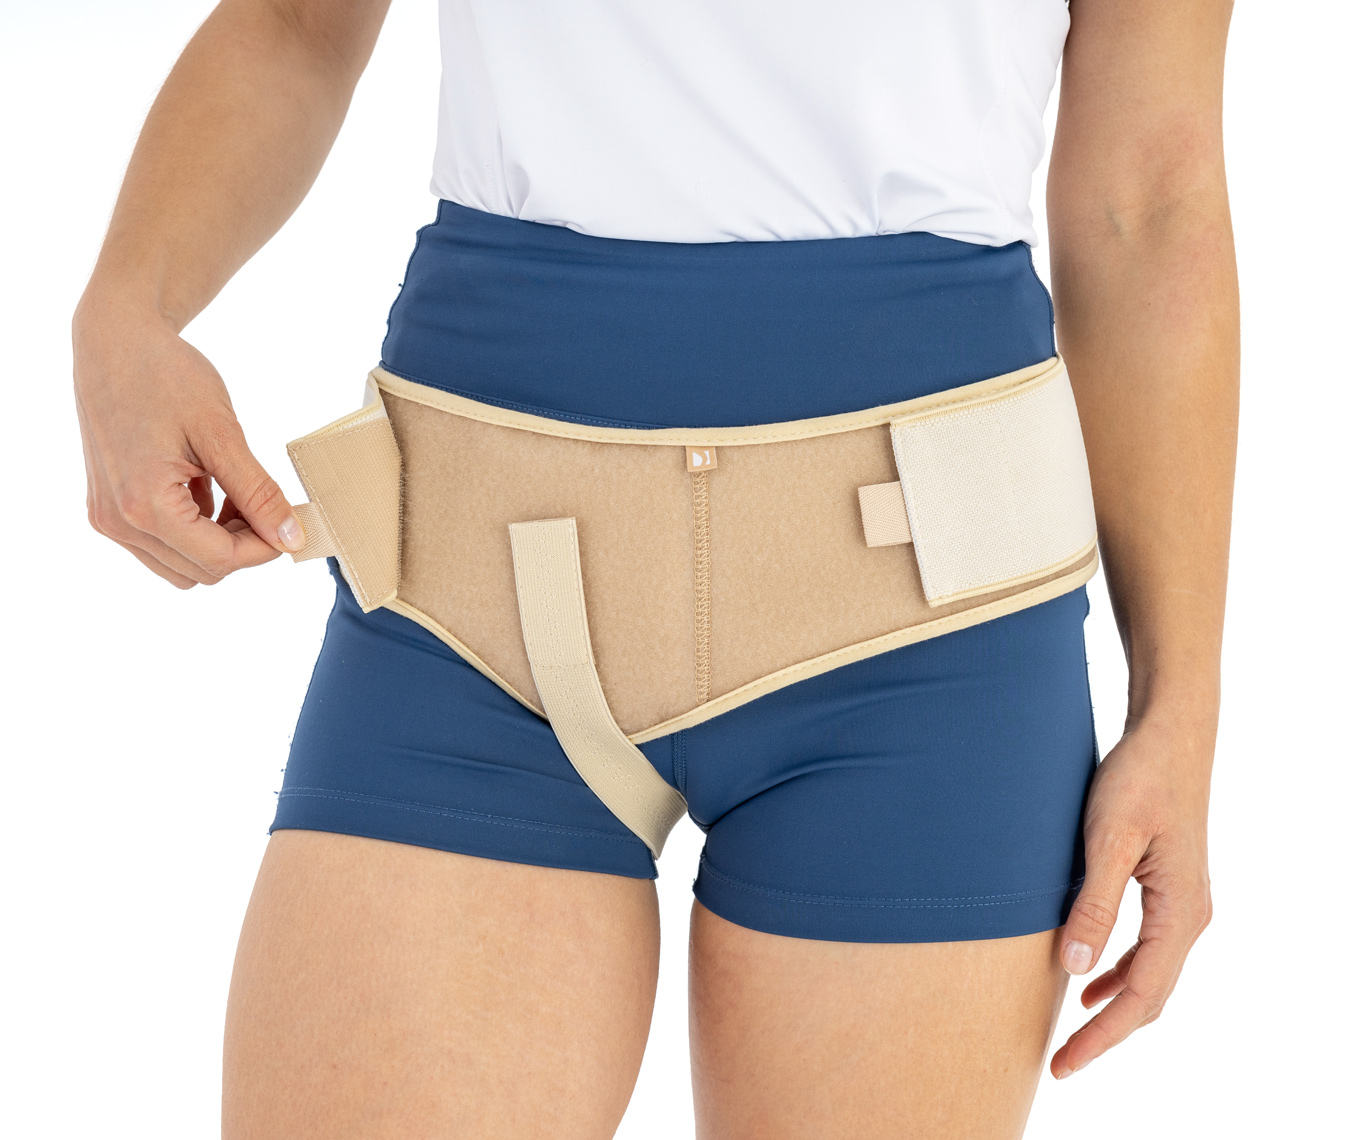 Groins brace AM-1PP/D  Reh4Mat – lower limb orthosis and braces